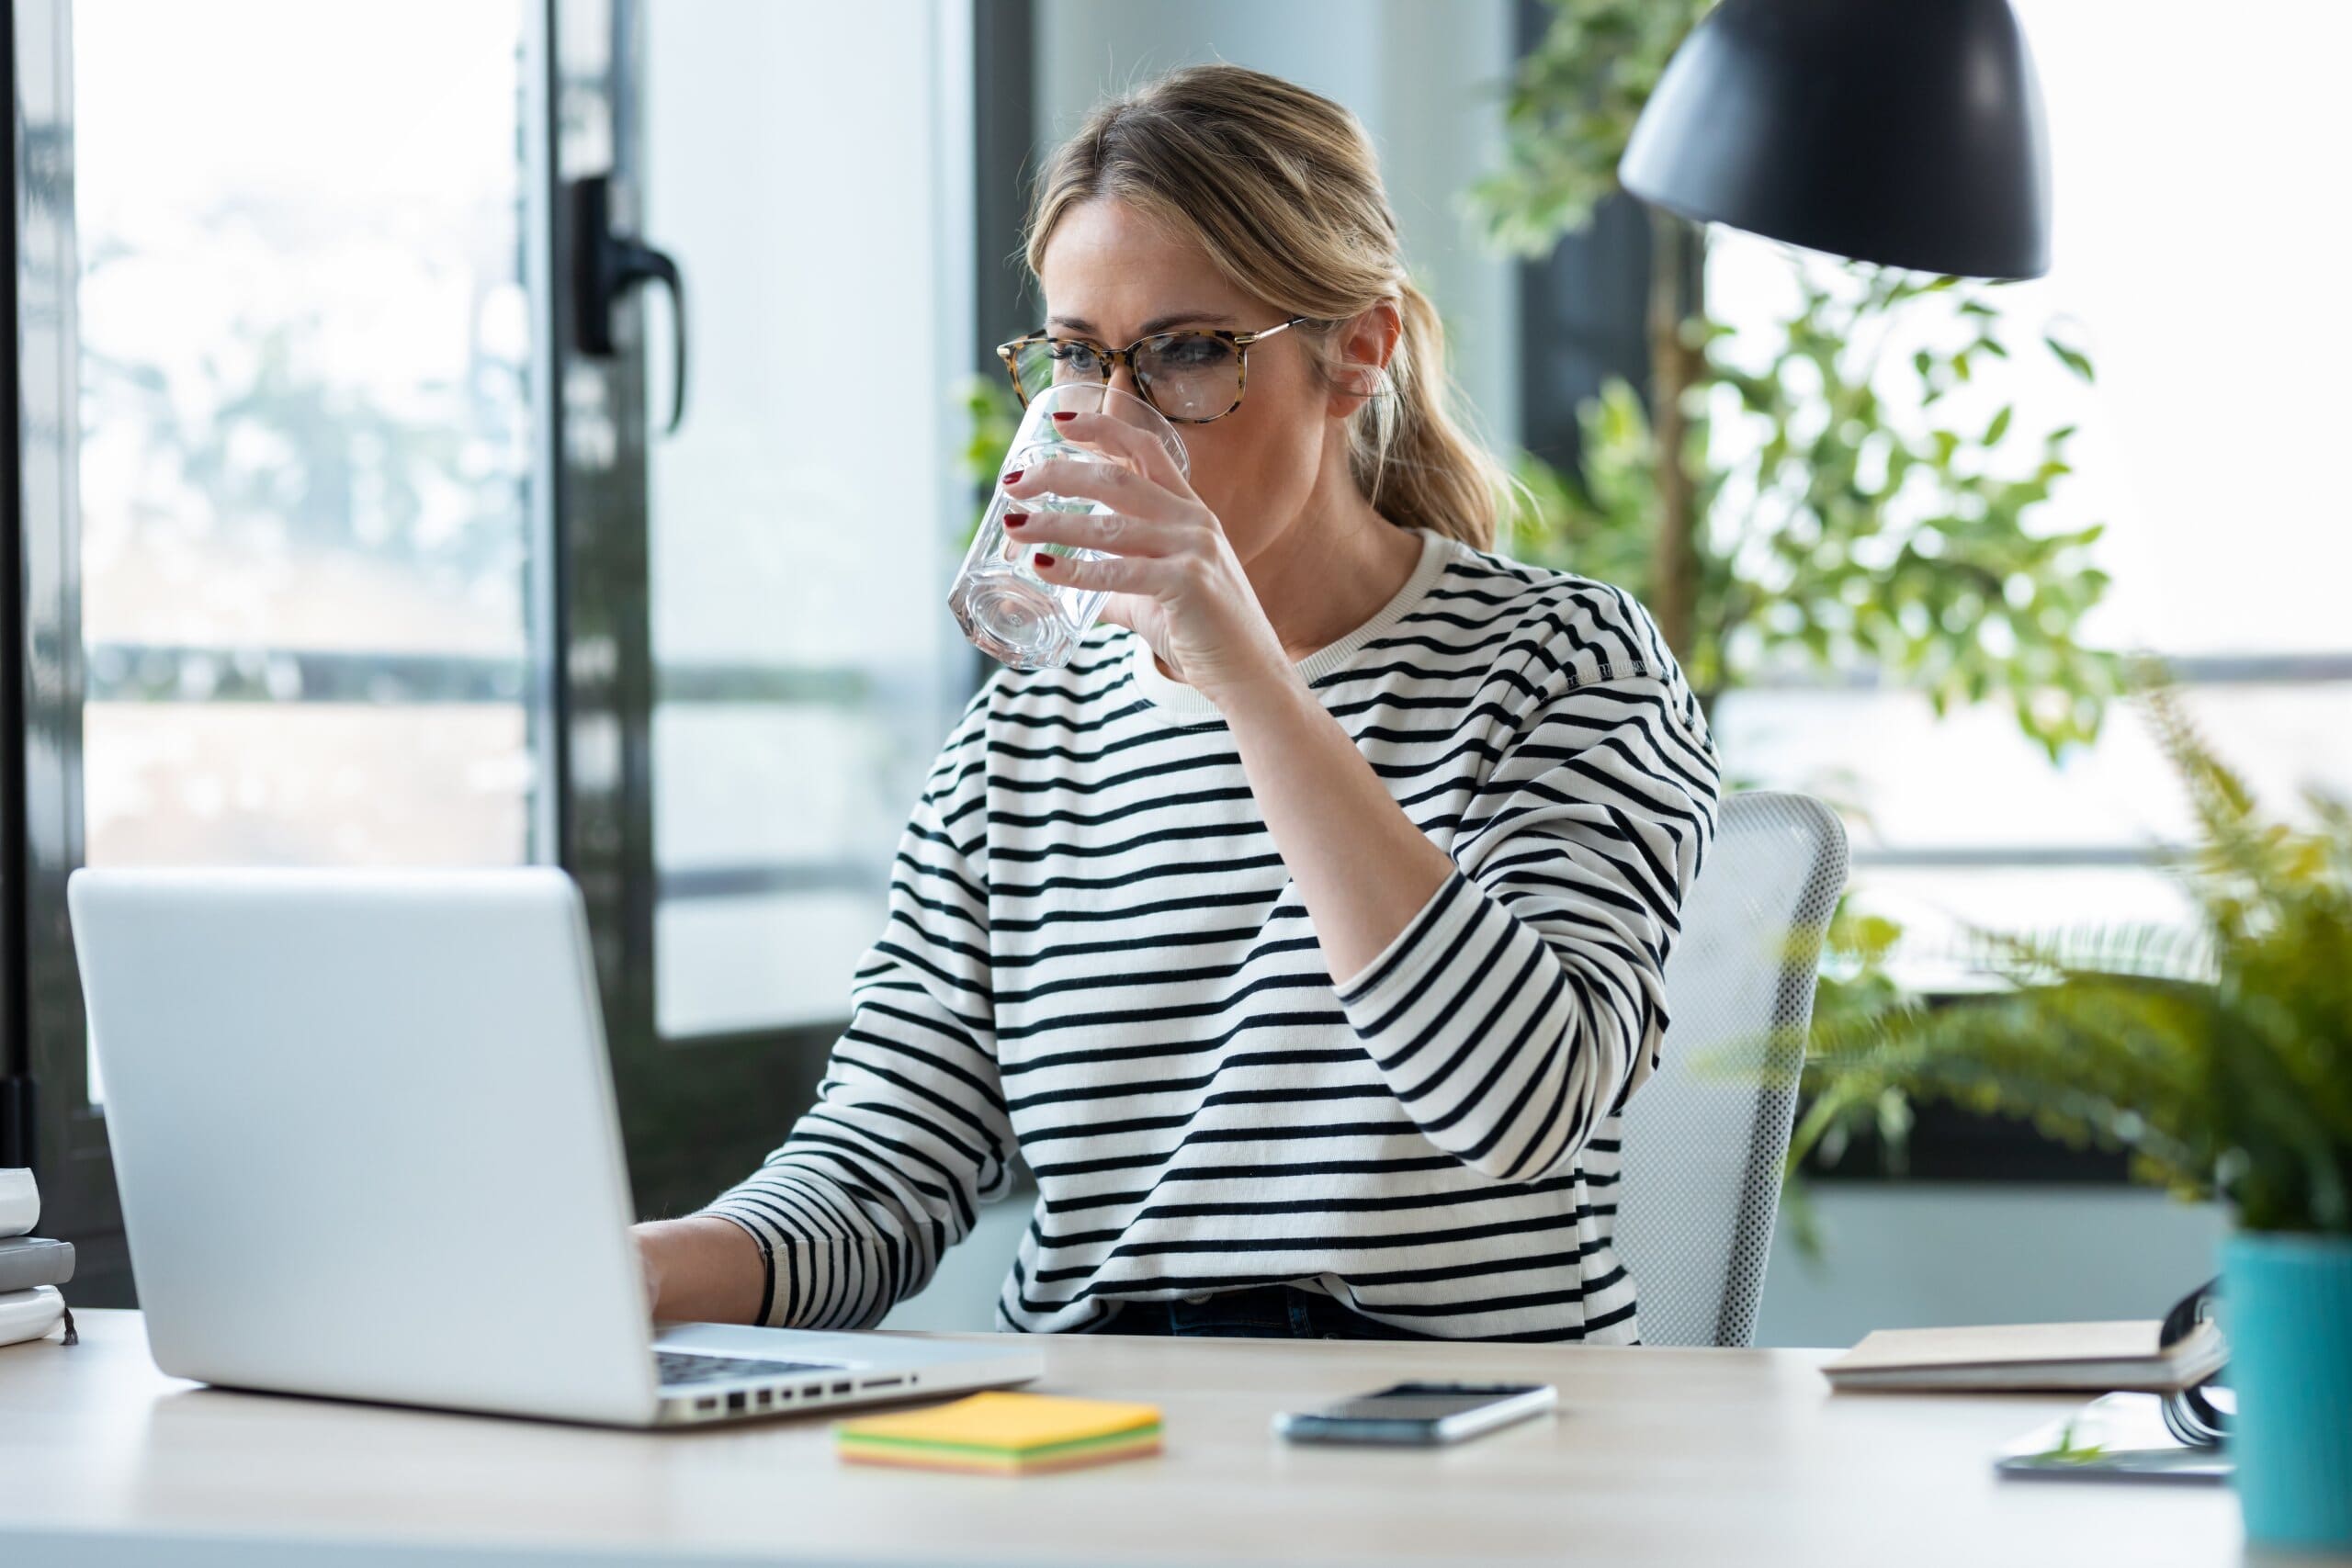 Woman sat at desk on laptop, drinking a glass of water.